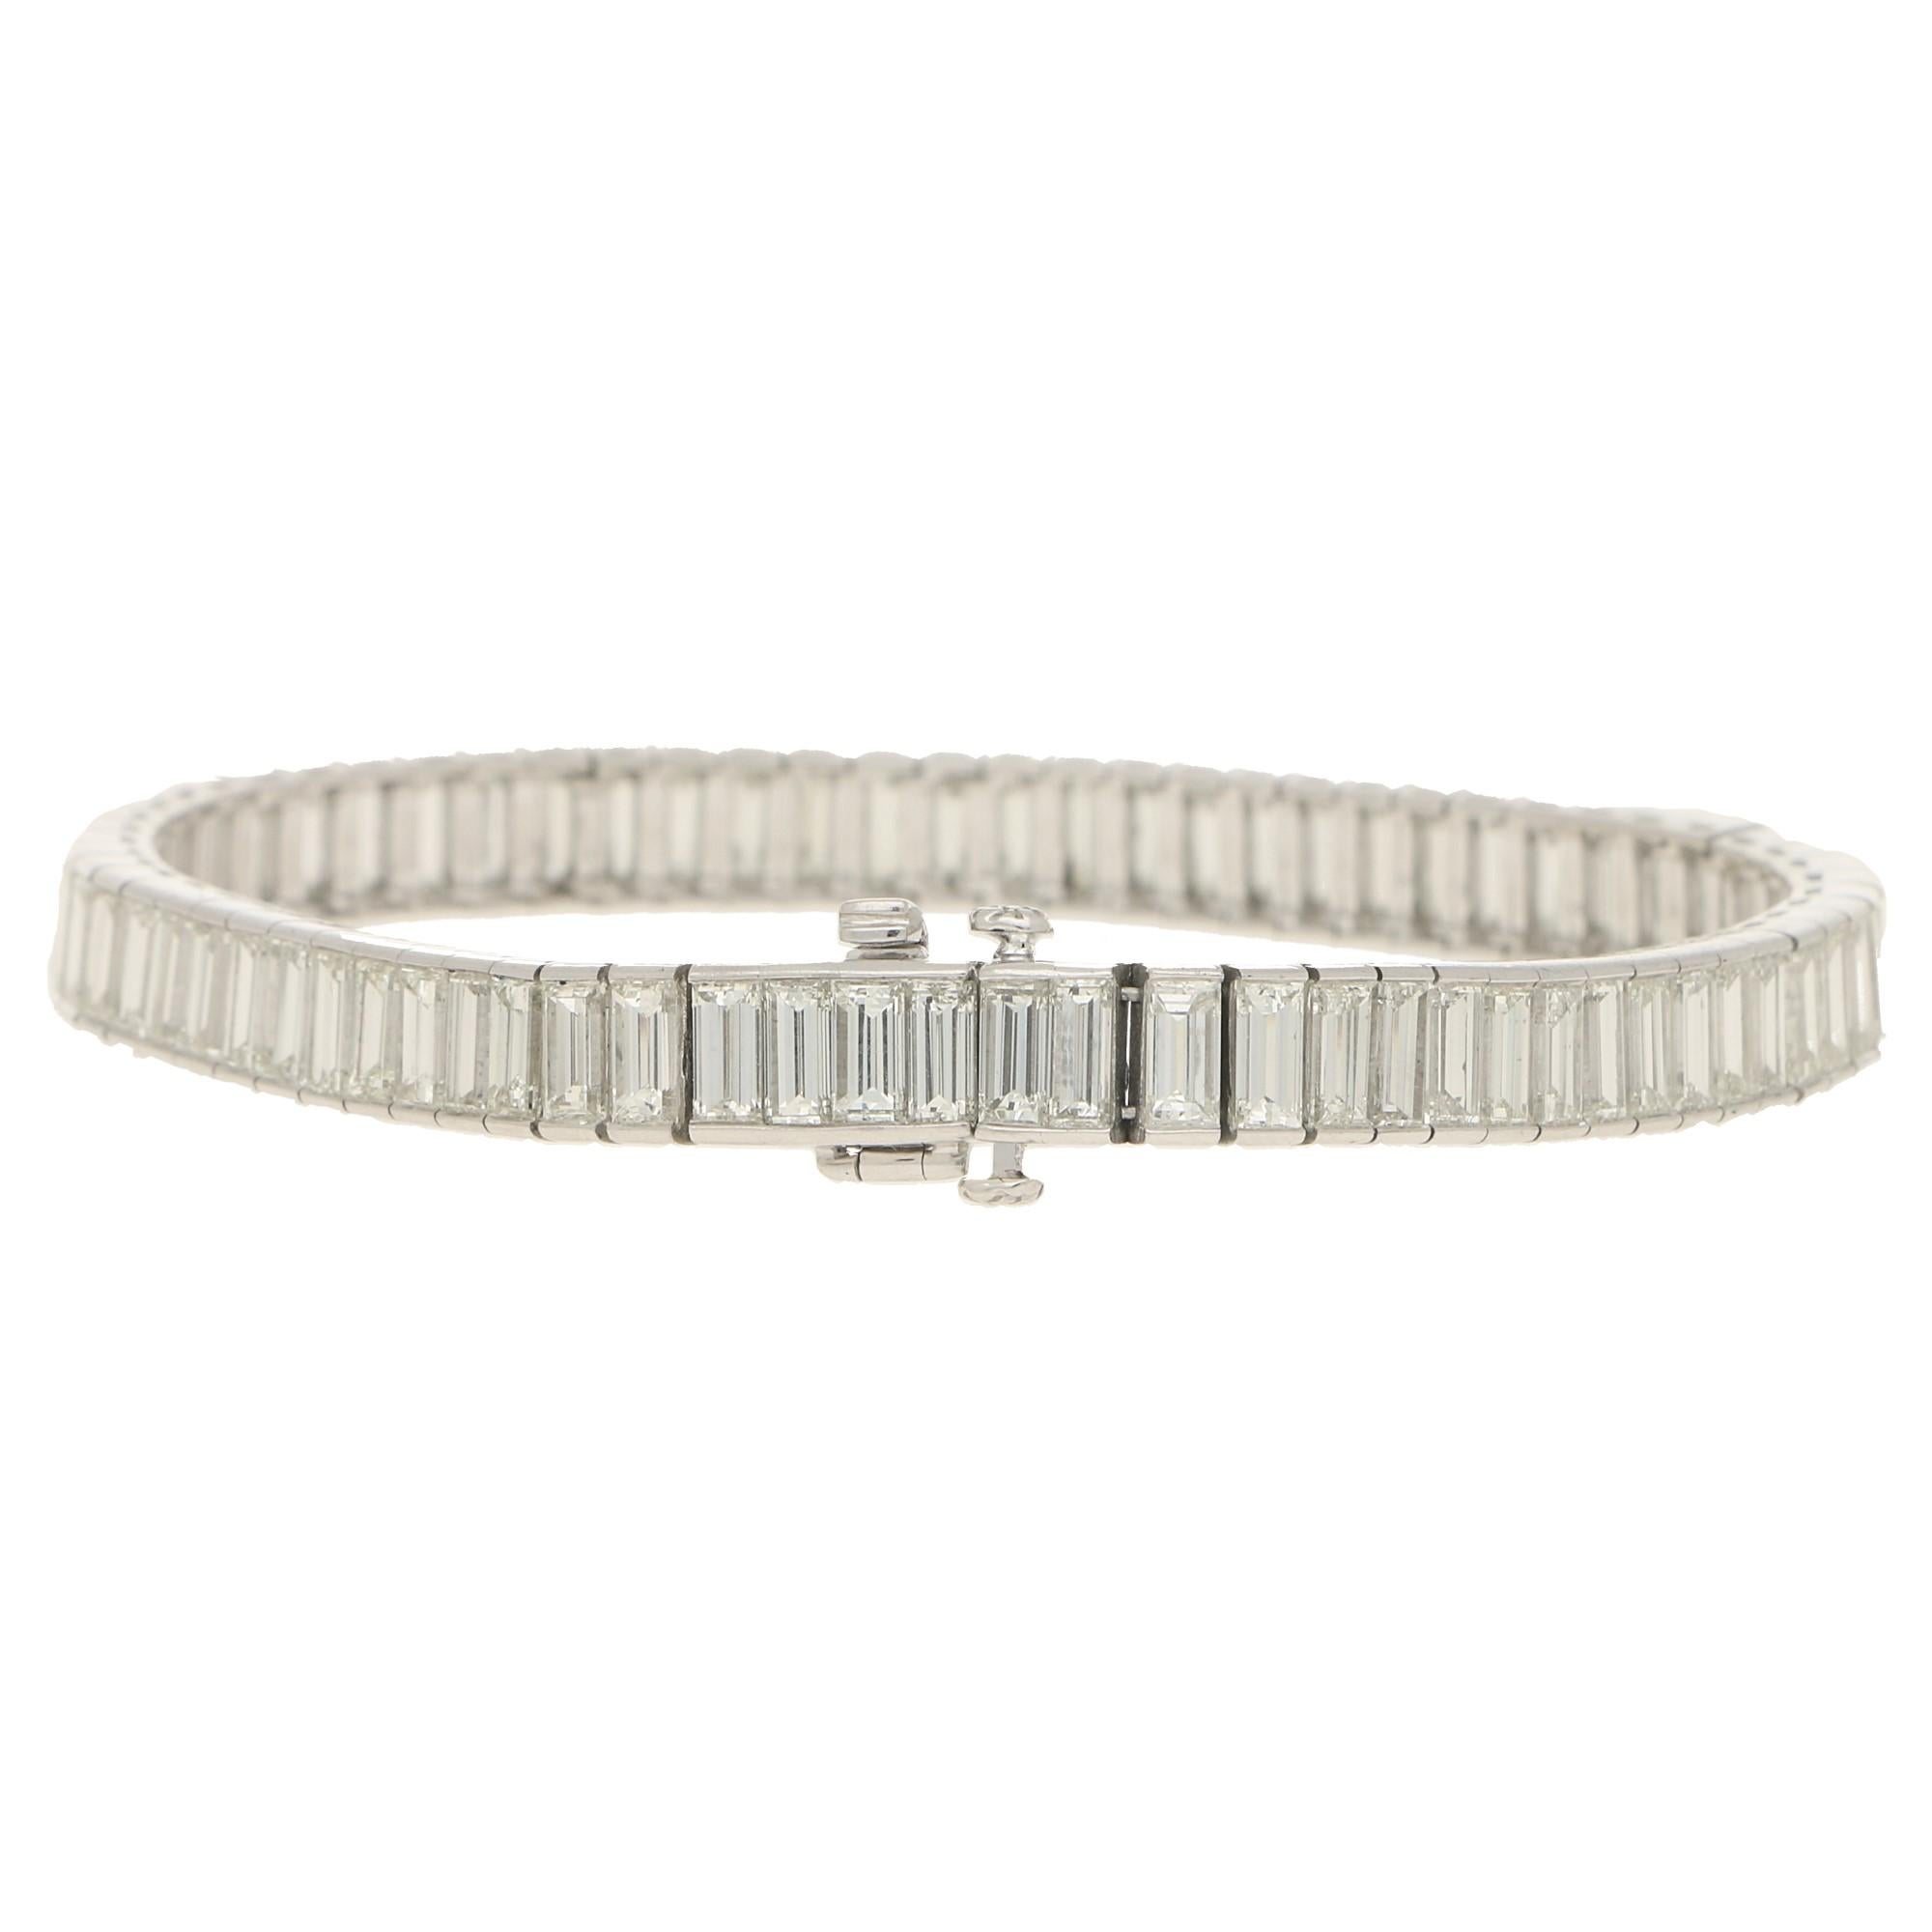 A magnificent Art Deco inspired baguette cut diamond line bracelet set in platinum. 

This stunning bracelet is composed of exactly 72 sparkly baguette cut diamonds all of which are rub over set individually in articulated links. Due to the design